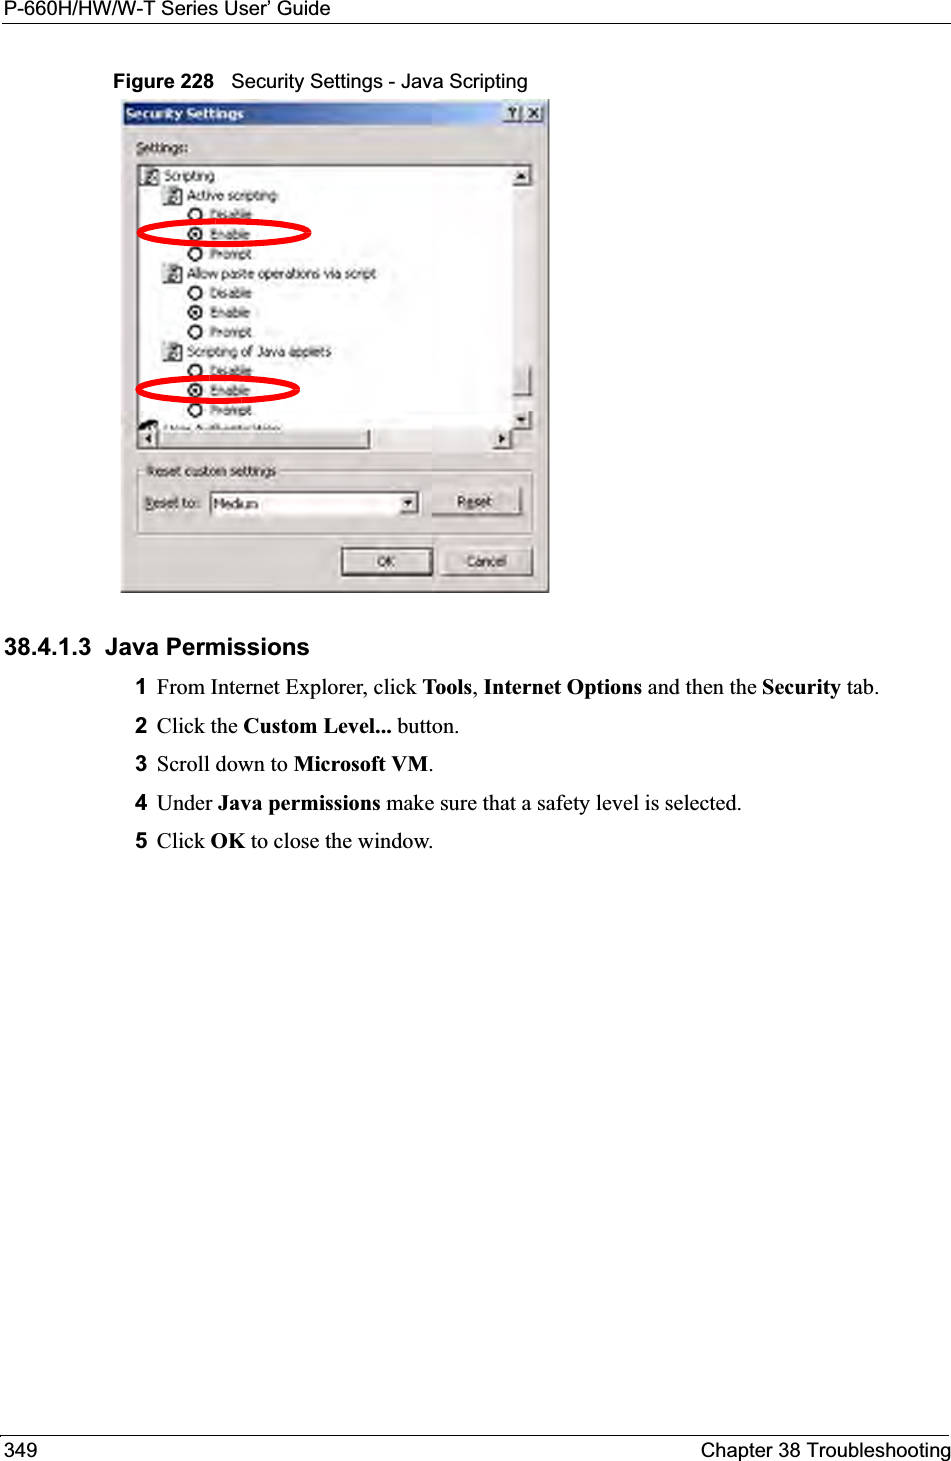 P-660H/HW/W-T Series User’ Guide349 Chapter 38 TroubleshootingFigure 228   Security Settings - Java Scripting38.4.1.3  Java Permissions1From Internet Explorer, click Tools,Internet Options and then the Security tab. 2Click the Custom Level... button. 3Scroll down to Microsoft VM.4Under Java permissions make sure that a safety level is selected.5Click OK to close the window.